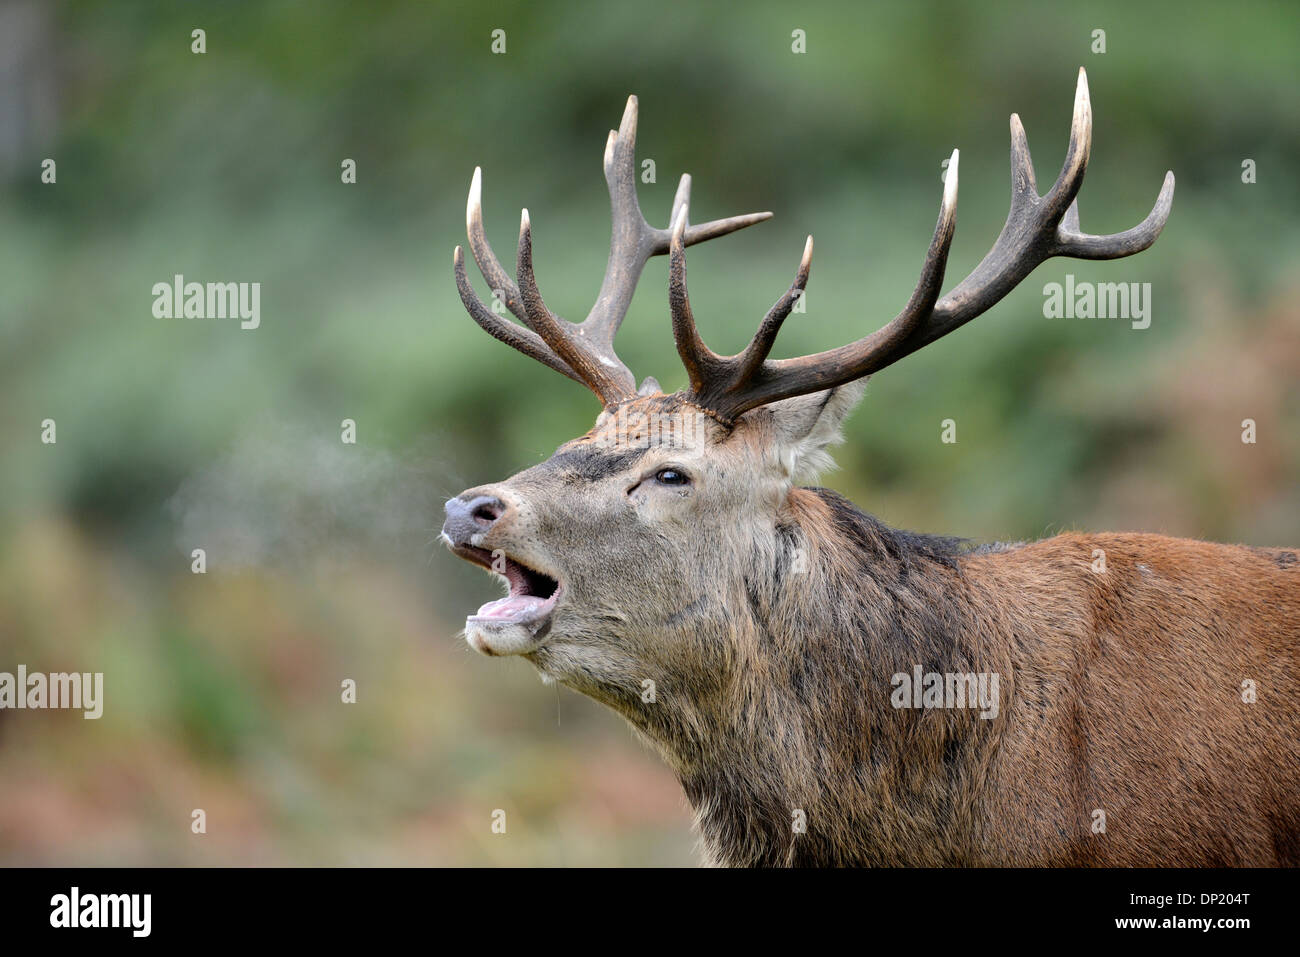 Red deer (Cervus elaphus). Stag roaring during the autumnal rut. The breath of the stag is clearly visible Stock Photo